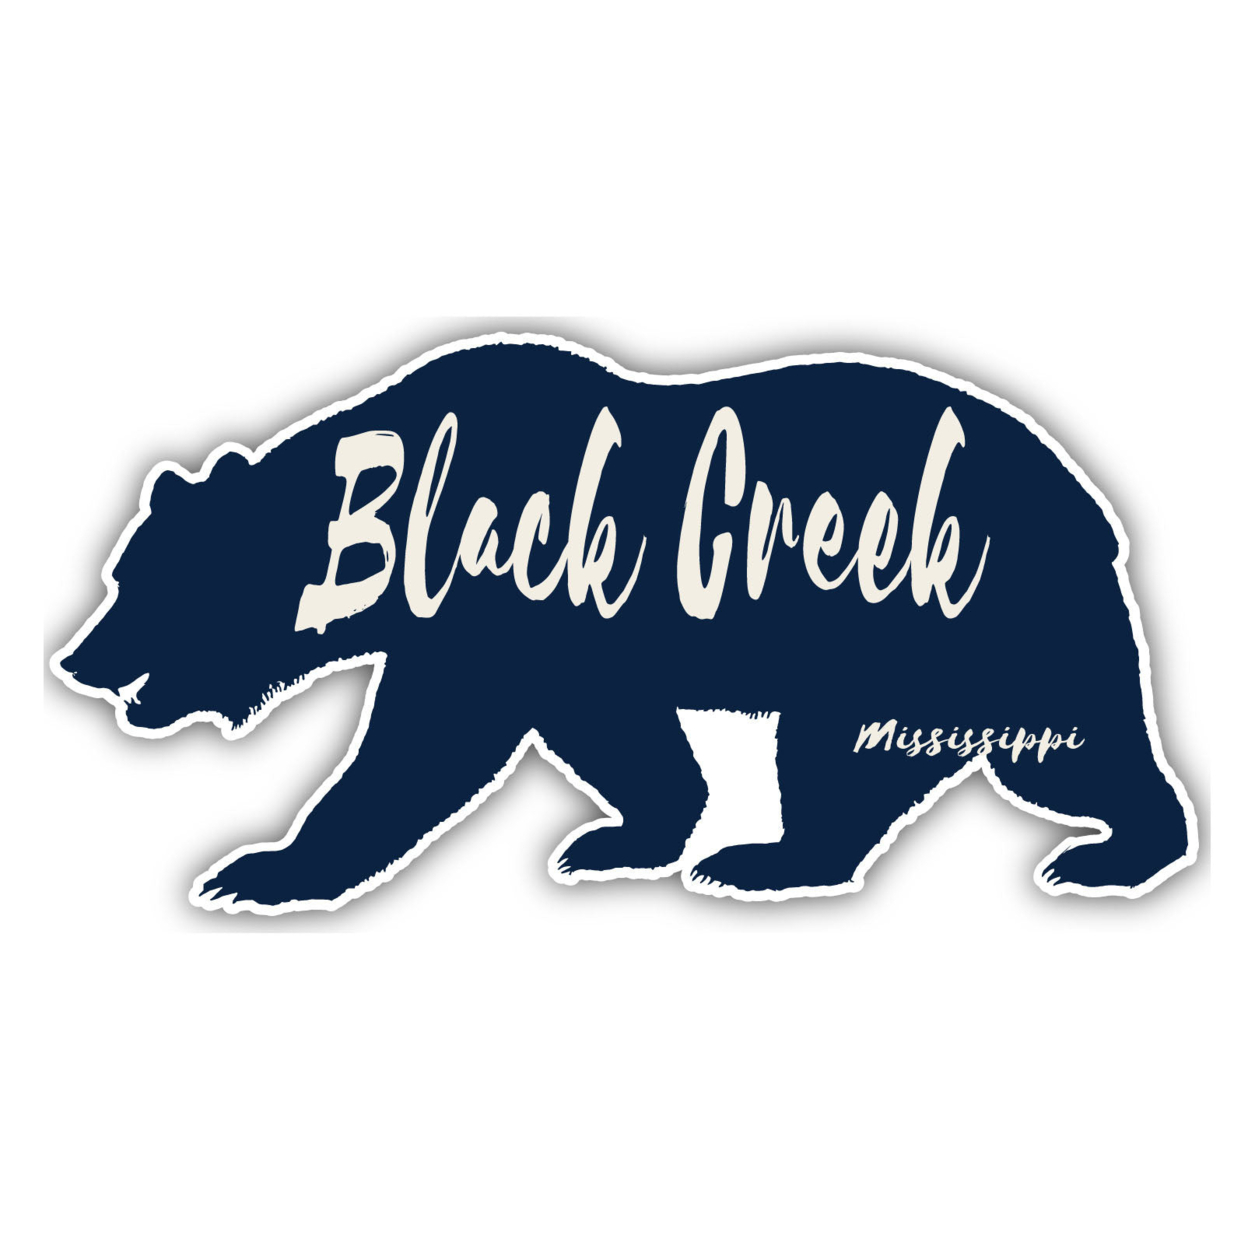 Black Creek Mississippi Souvenir Decorative Stickers (Choose Theme And Size) - 4-Pack, 12-Inch, Bear